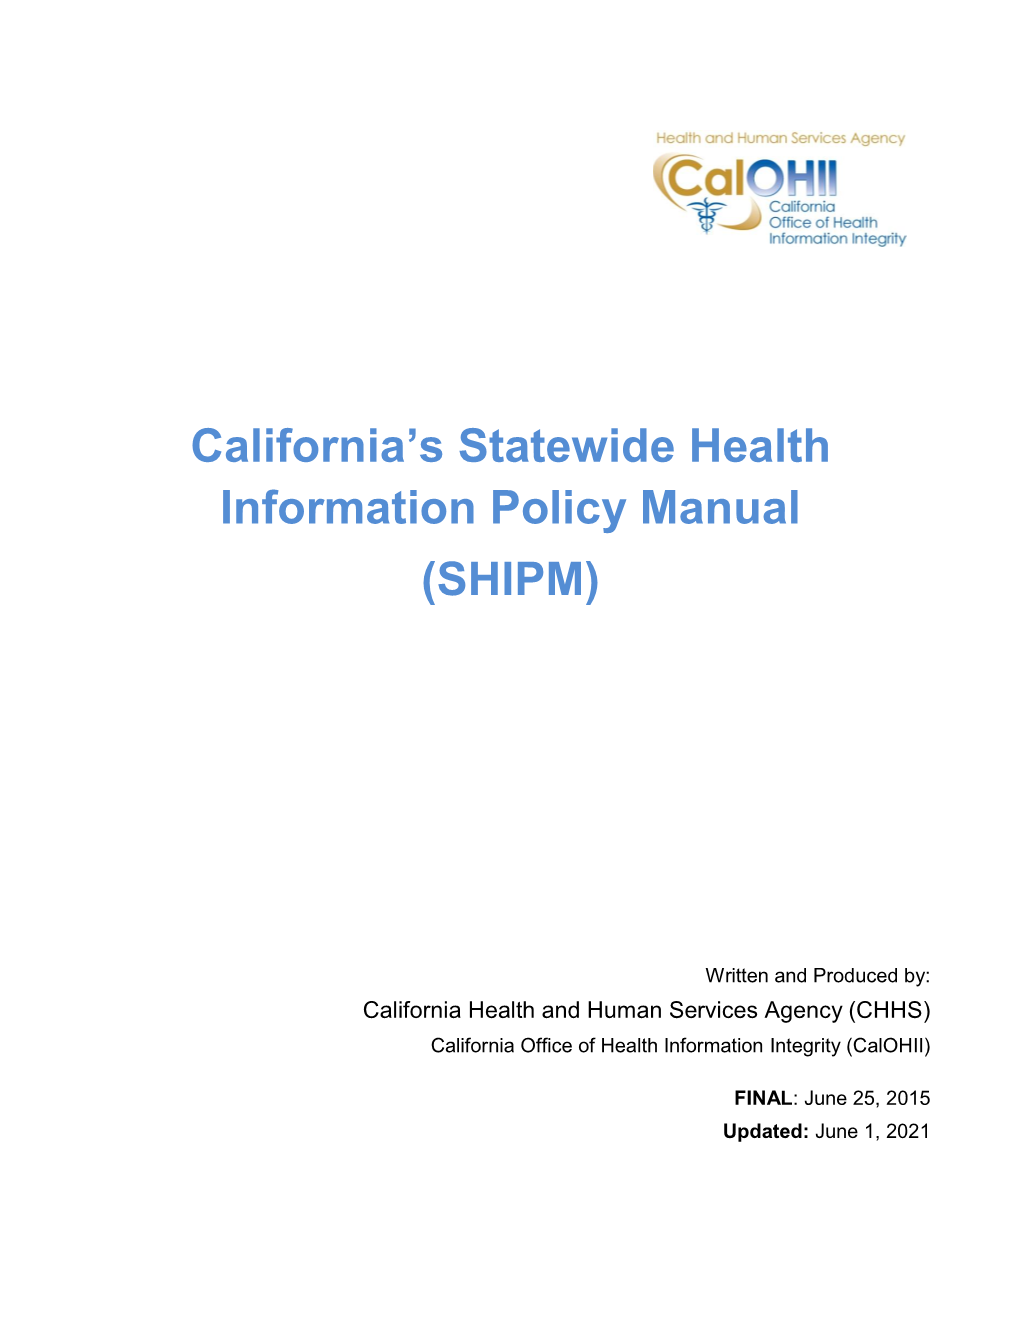 California's Statewide Health Information Policy Manual (SHIPM)